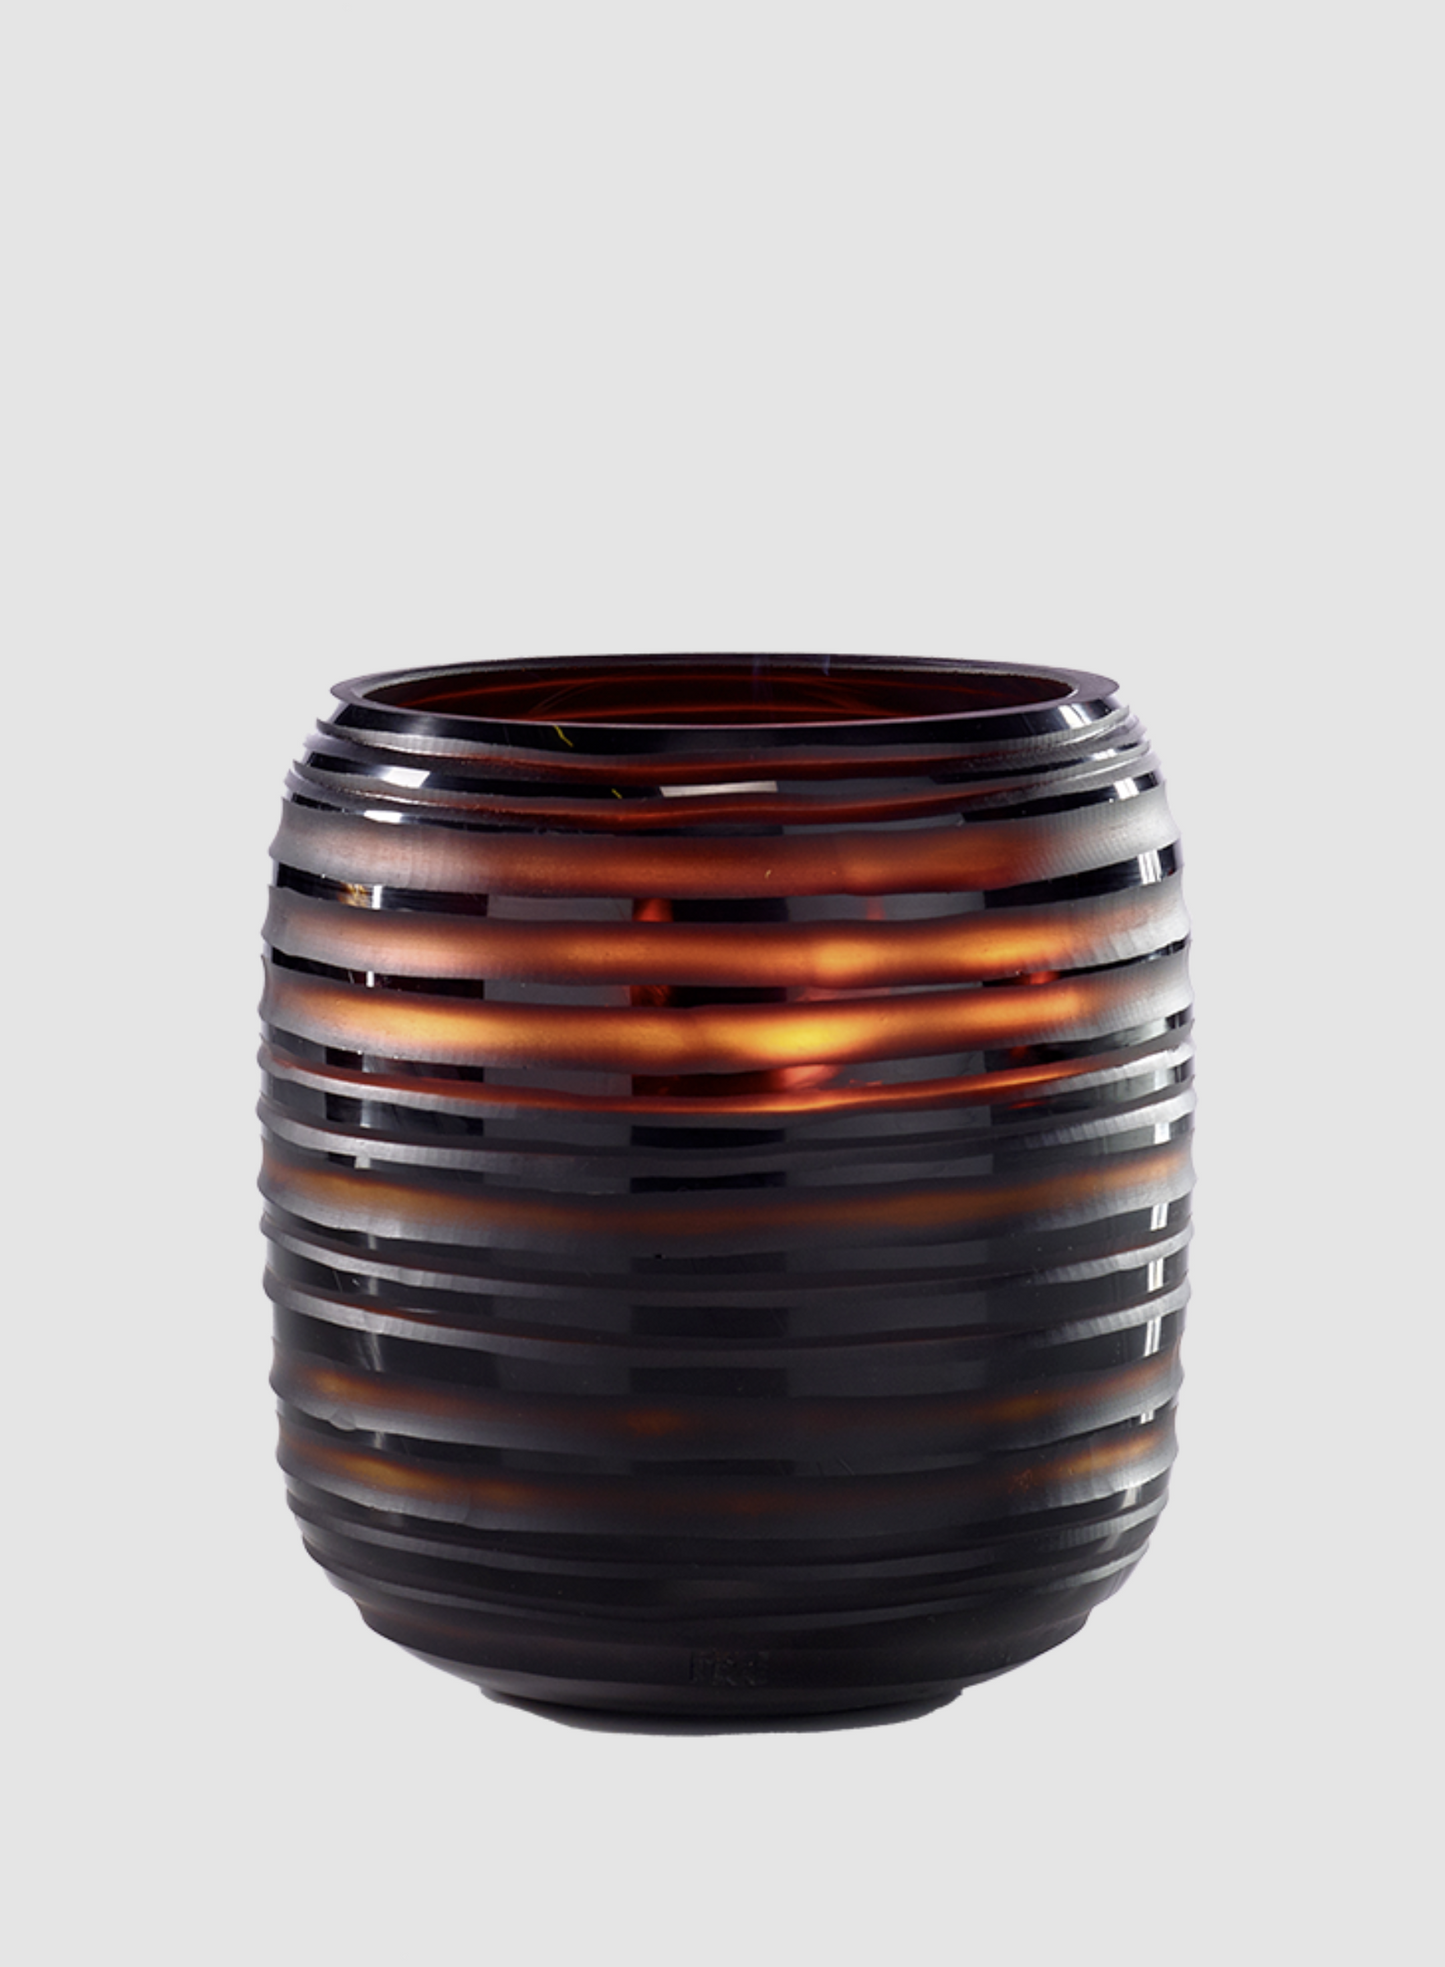 ONNO - AMBER / SPHERE LARGE - $340.00